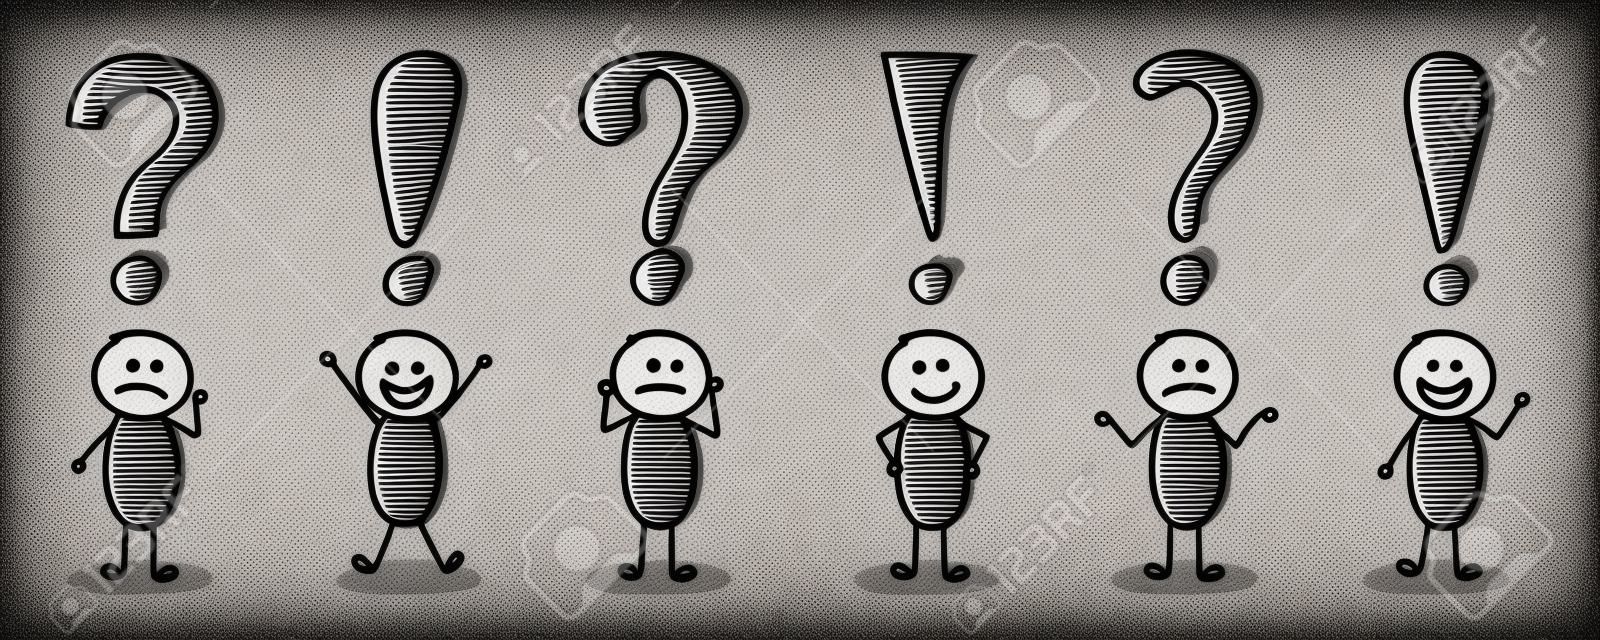 Funny stickmen with question mark and exclamation point icons - big set. Vector.